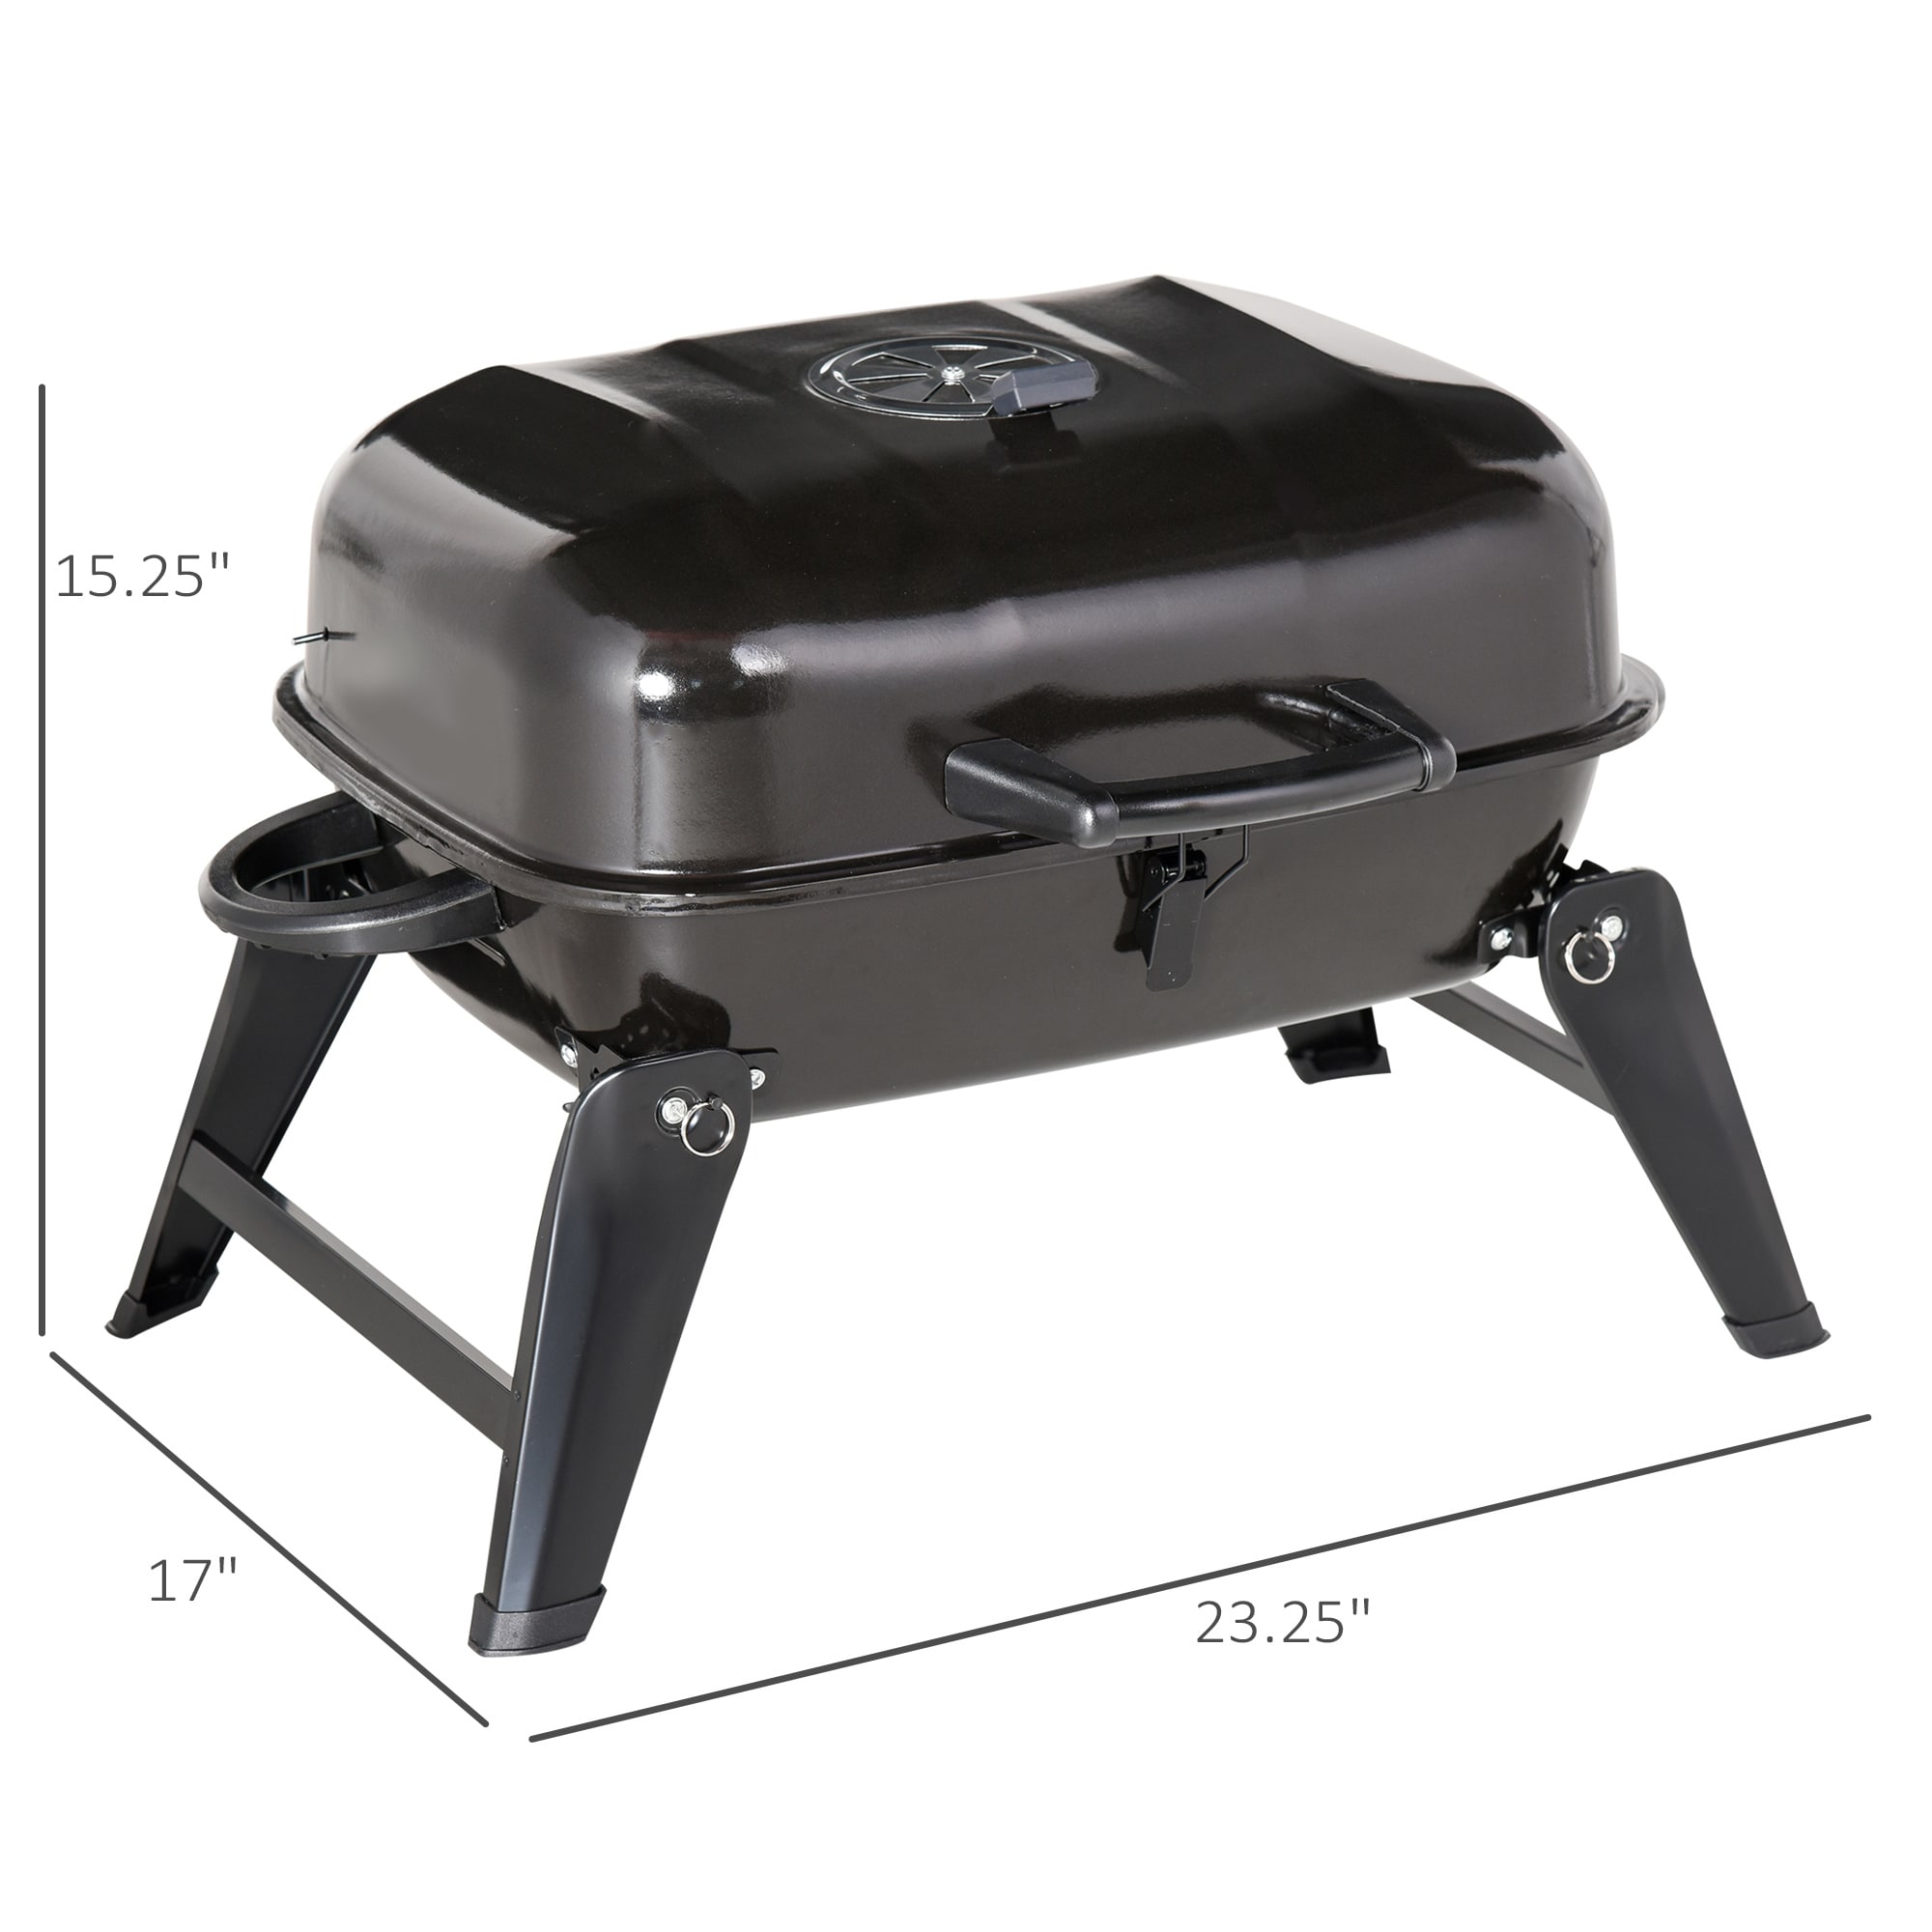 J&V Textiles BBQ Round Grill, 14 inch Portable Charcoal Grill, Lightweight Grill for Barbecue Party, Dual Vents for Temp & Charcoal Control